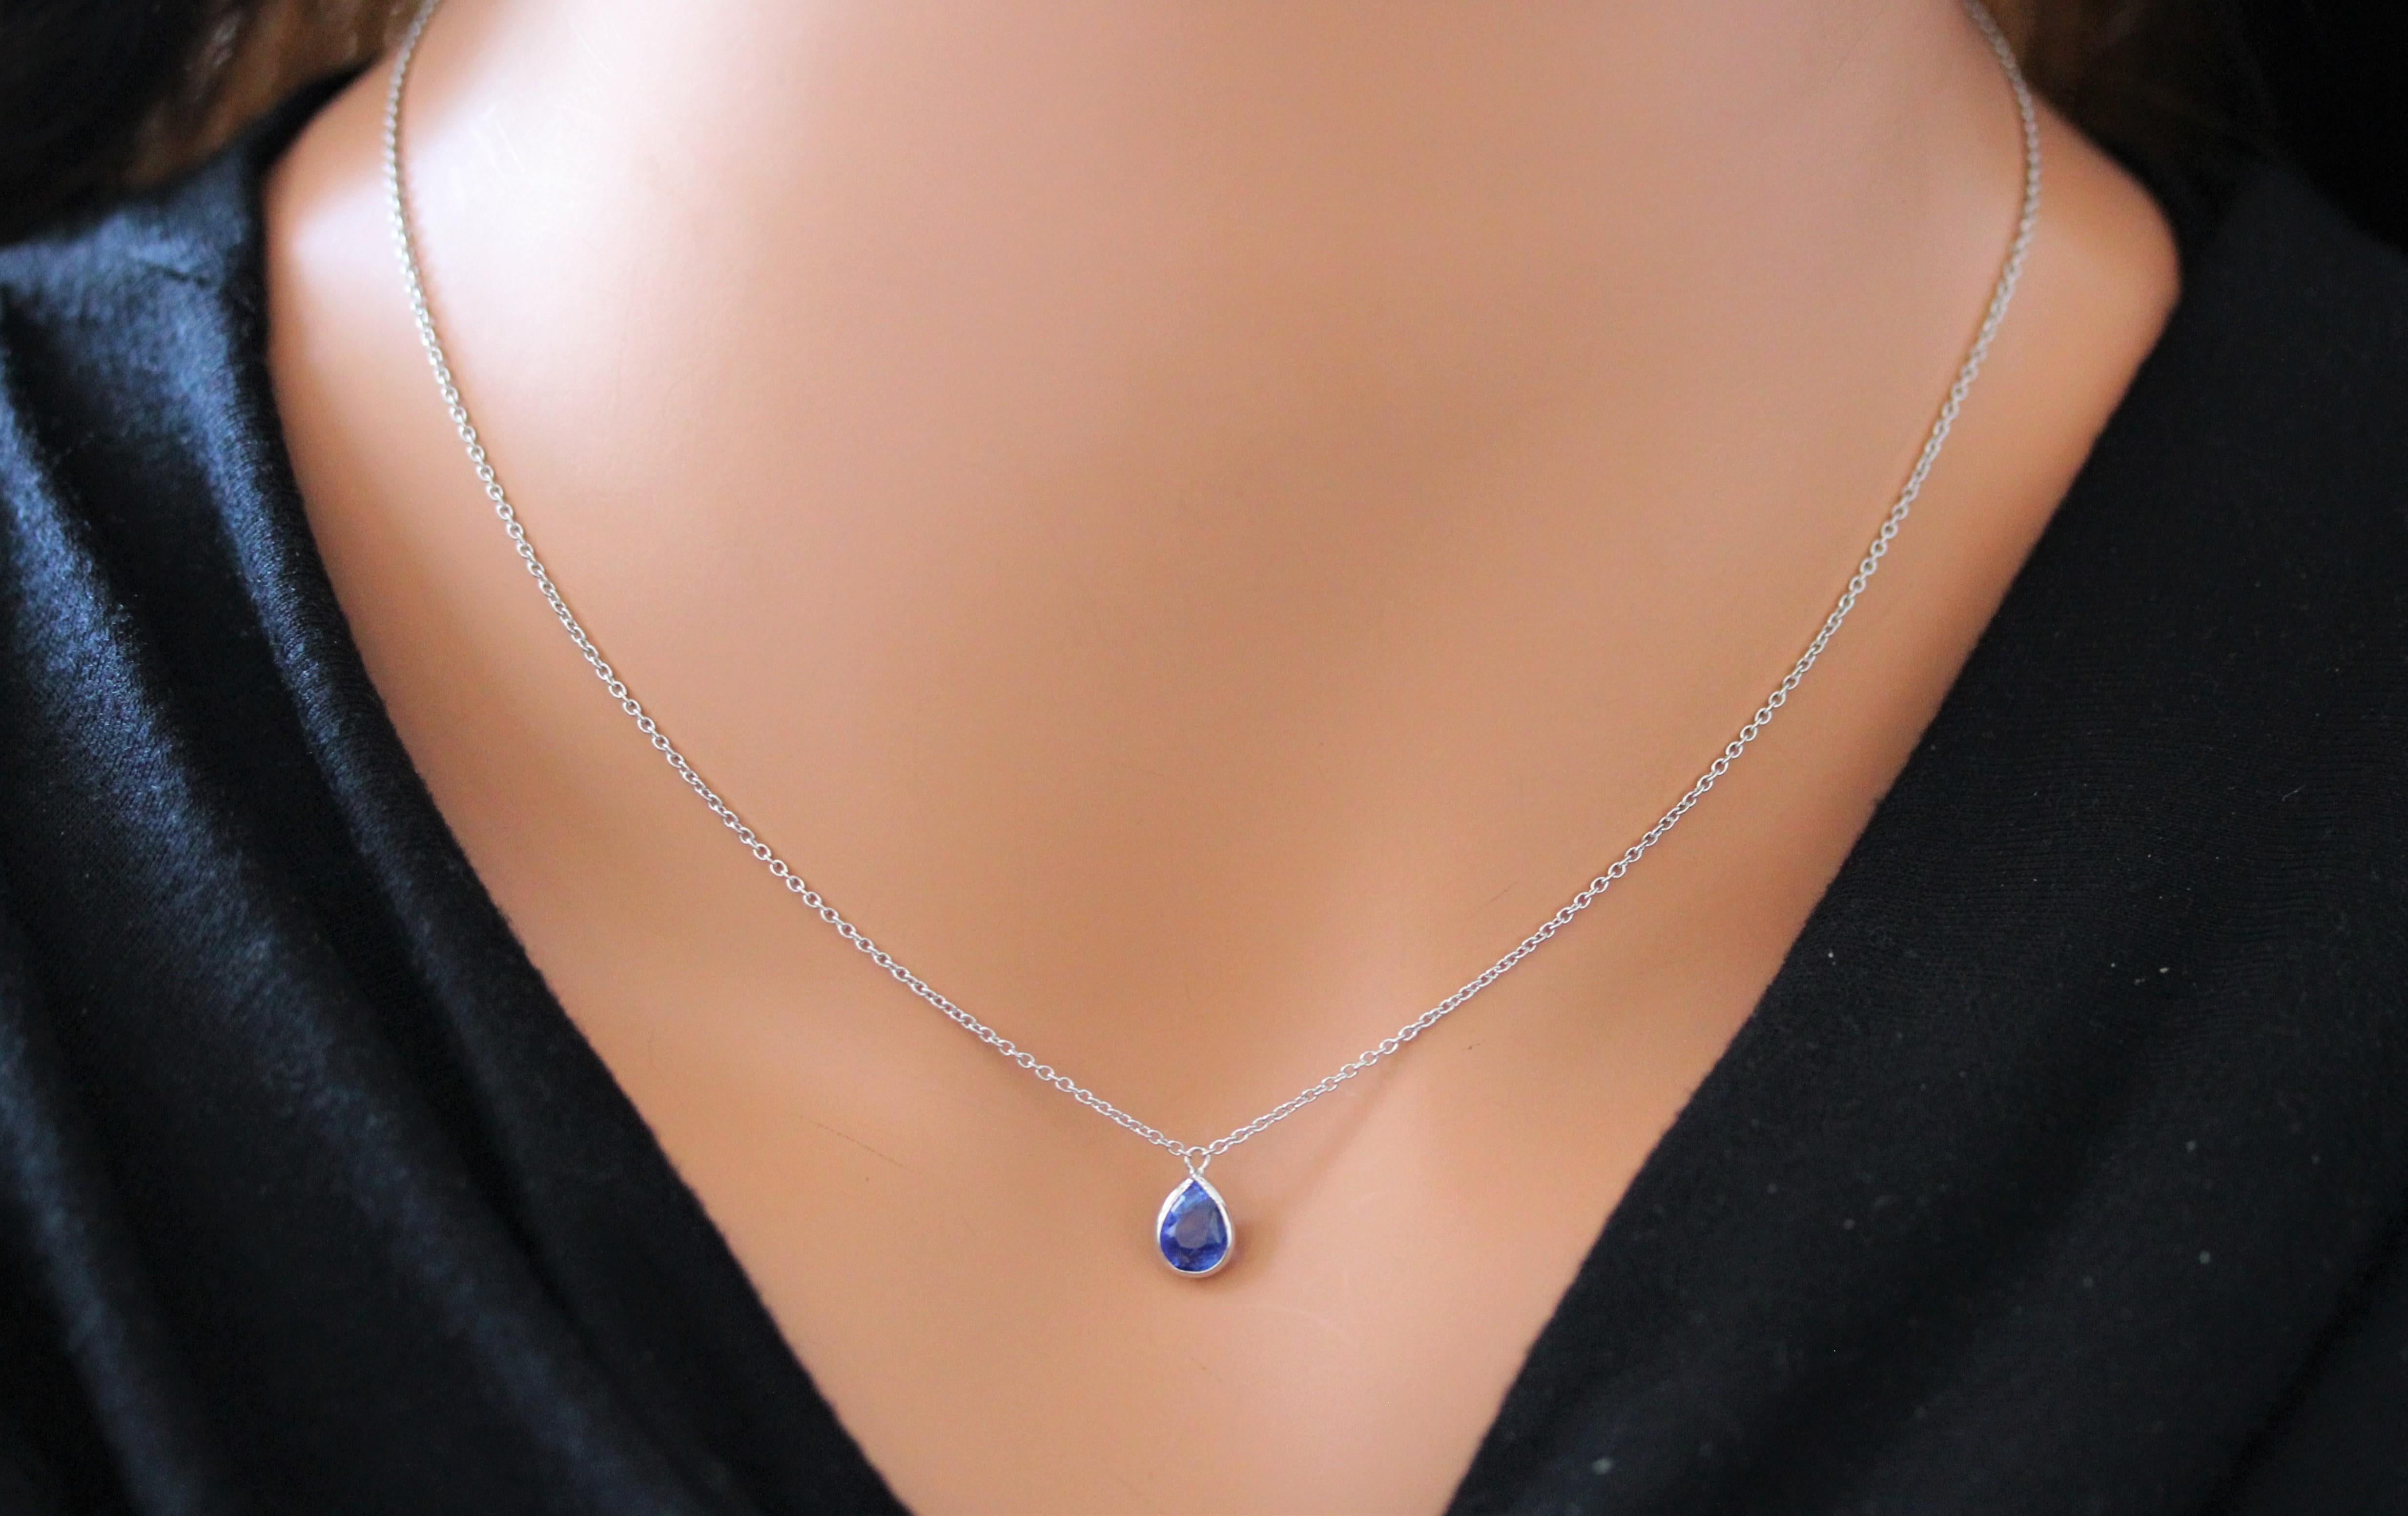 Contemporary 1.49 Carat Pear Sapphire Blue Fashion Necklaces In 14k White Gold For Sale